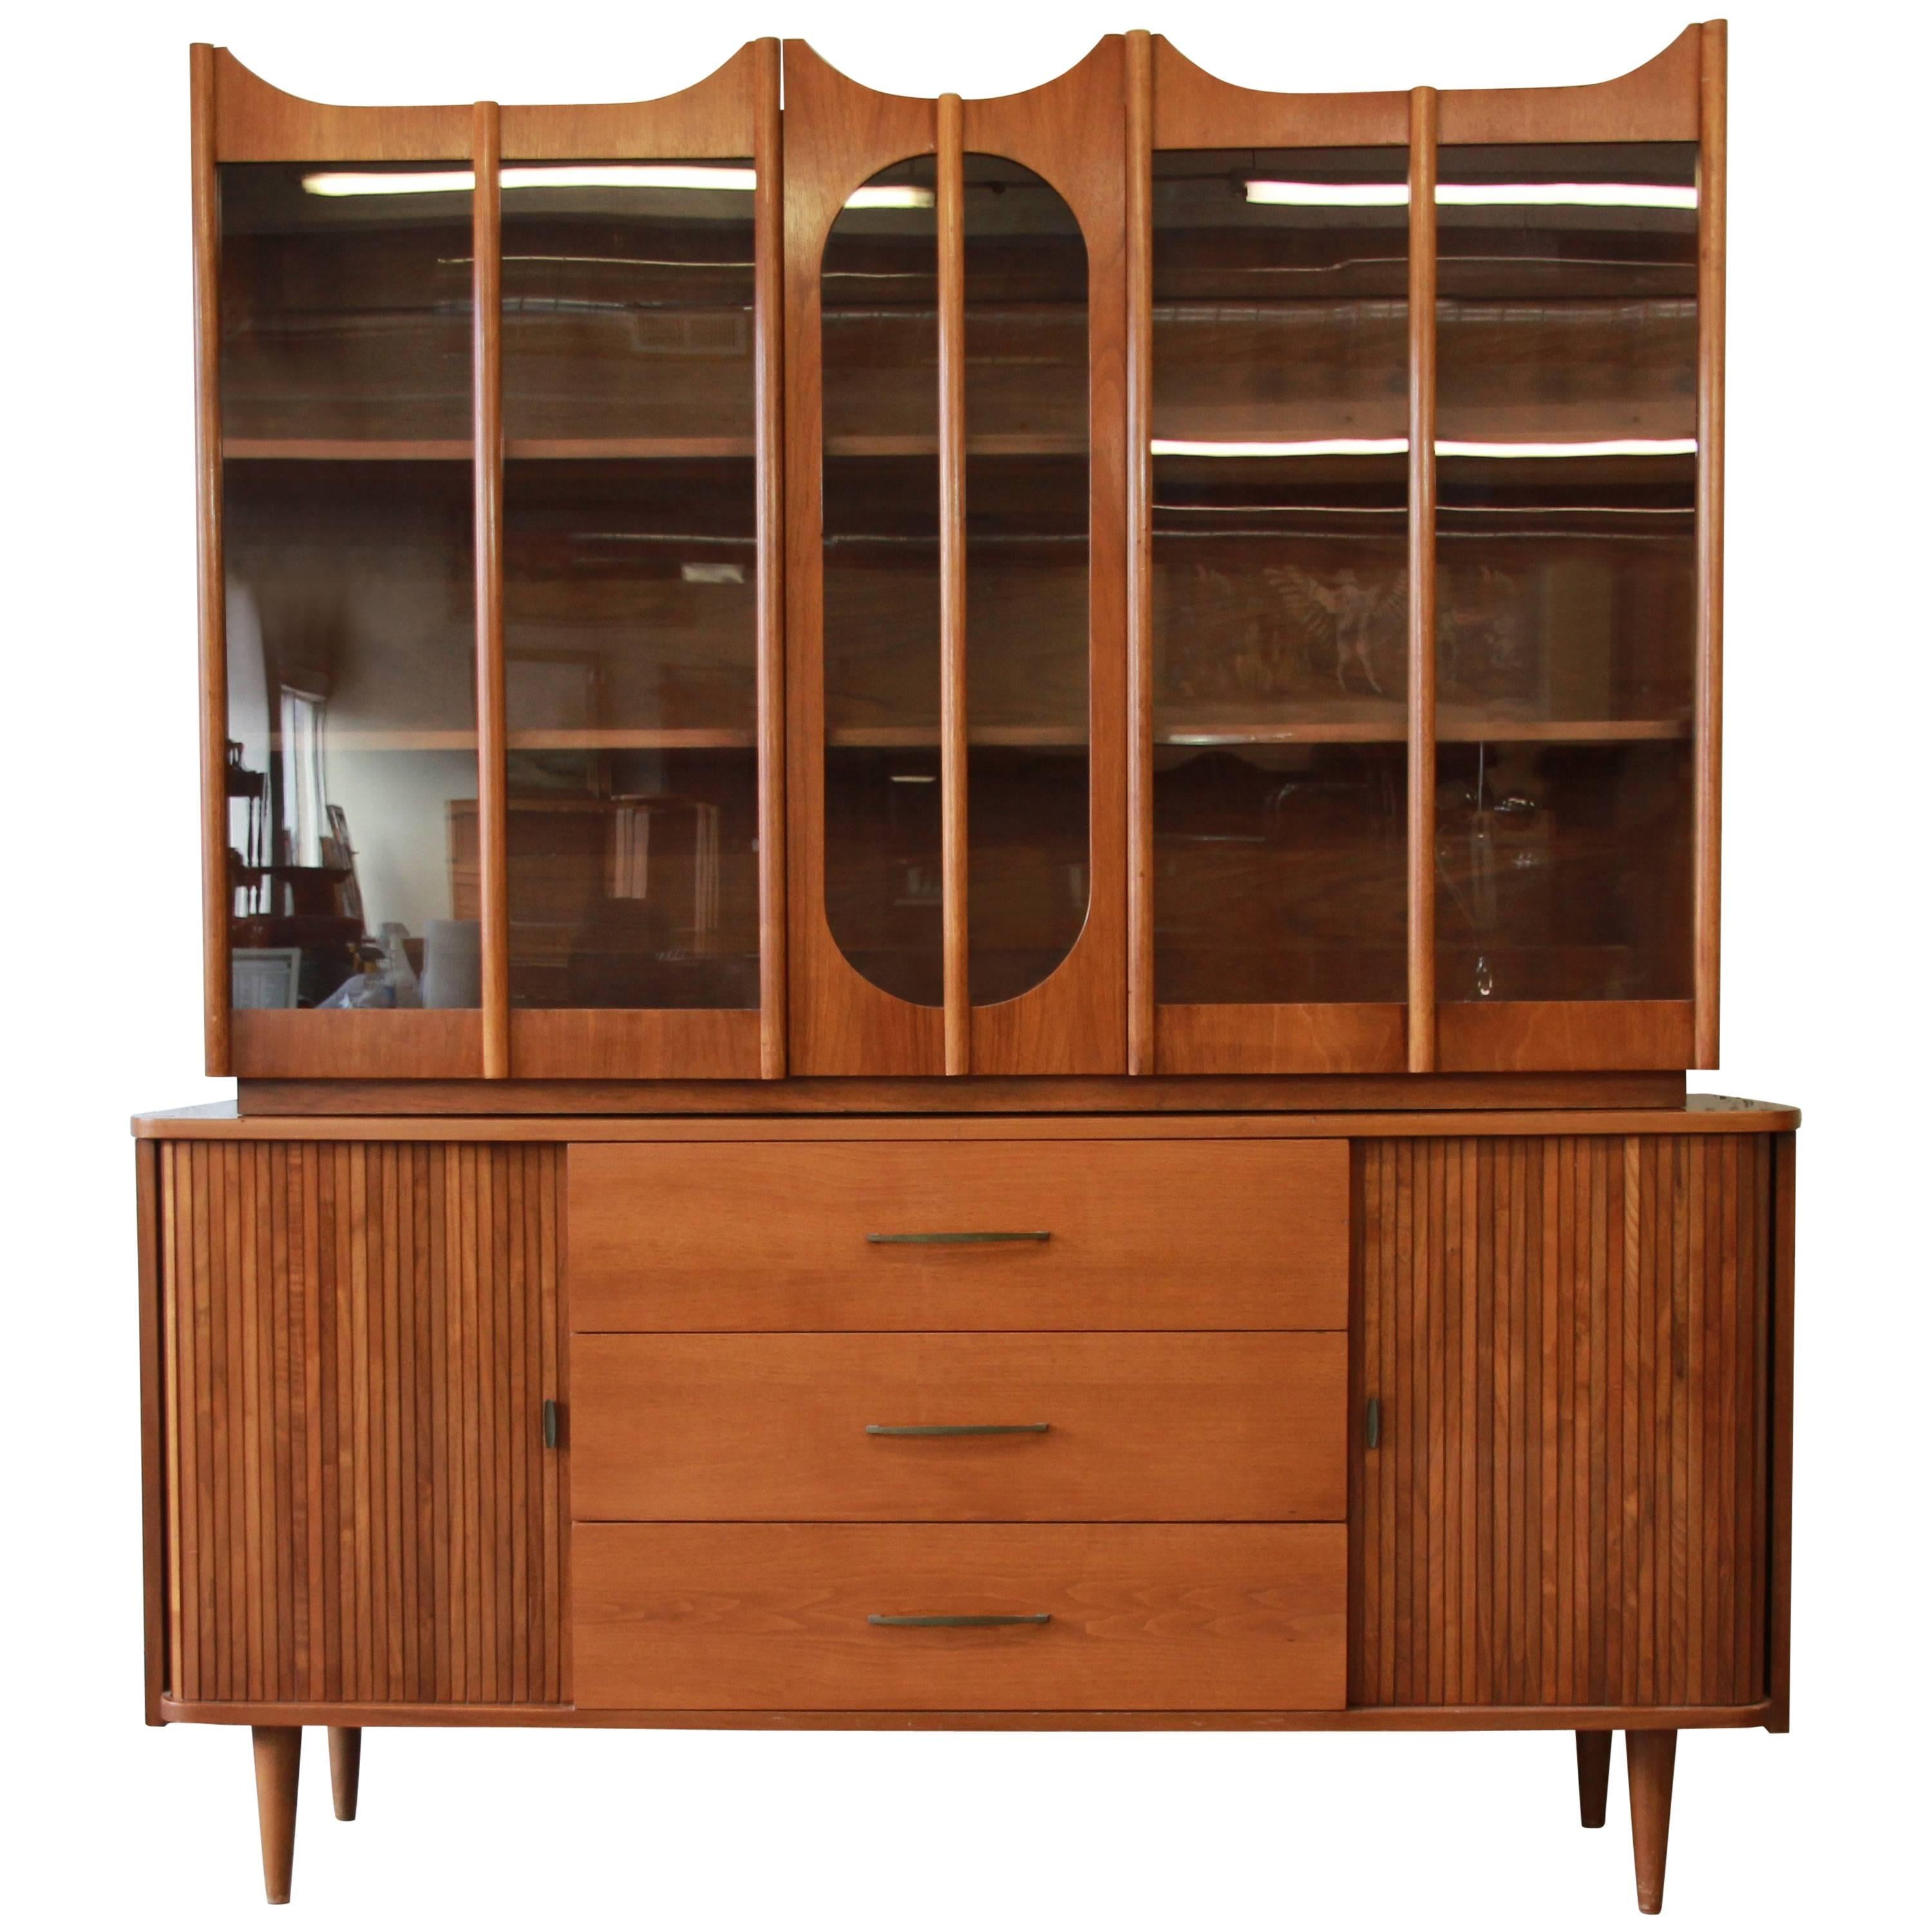 Mid-Century Modern Tambour Door Sideboard Credenza with Glass Front Hutch Top